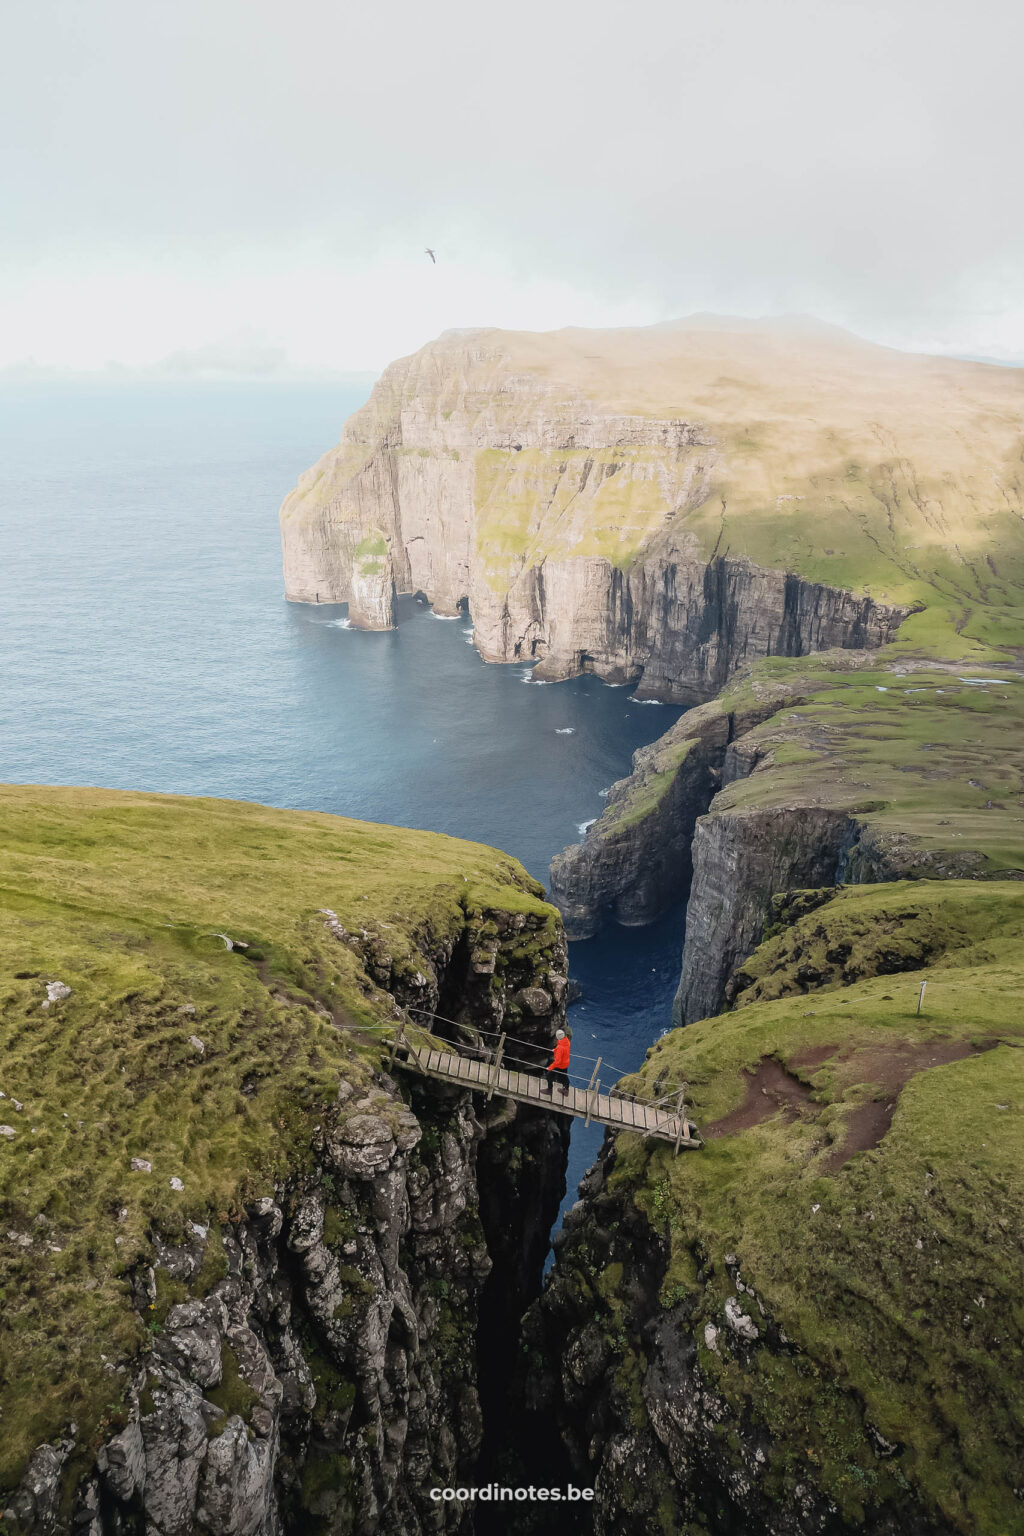 Hiking at Rituskor on Suðuroy is one of the things to do in the Faroe Islands.